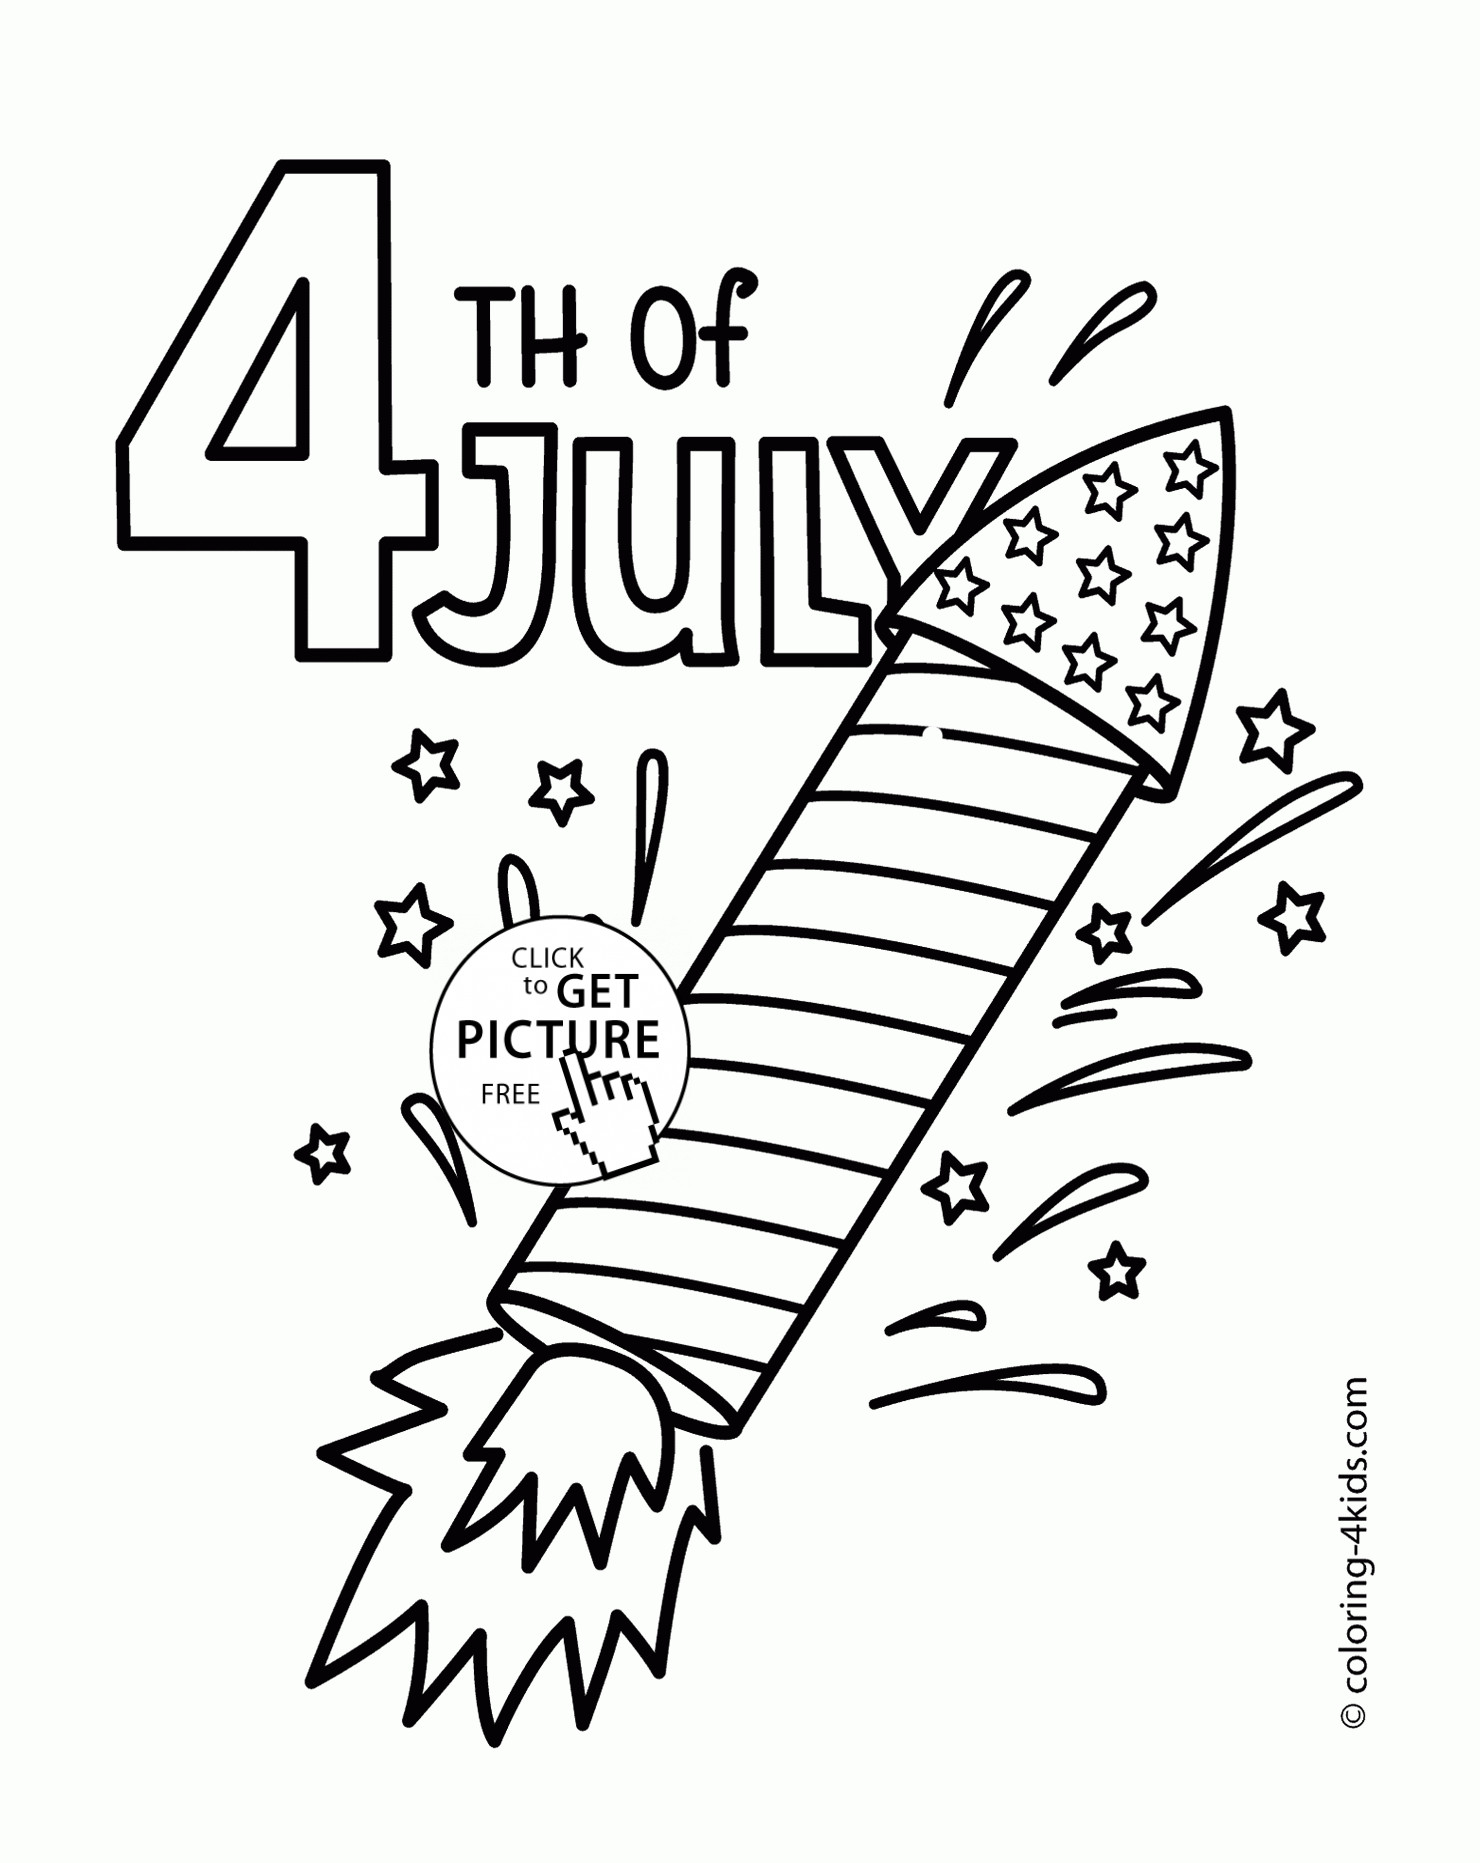 I Love Usa Coloring Pages
 Now I Love Usa Coloring Pages 4th July For Toddlers